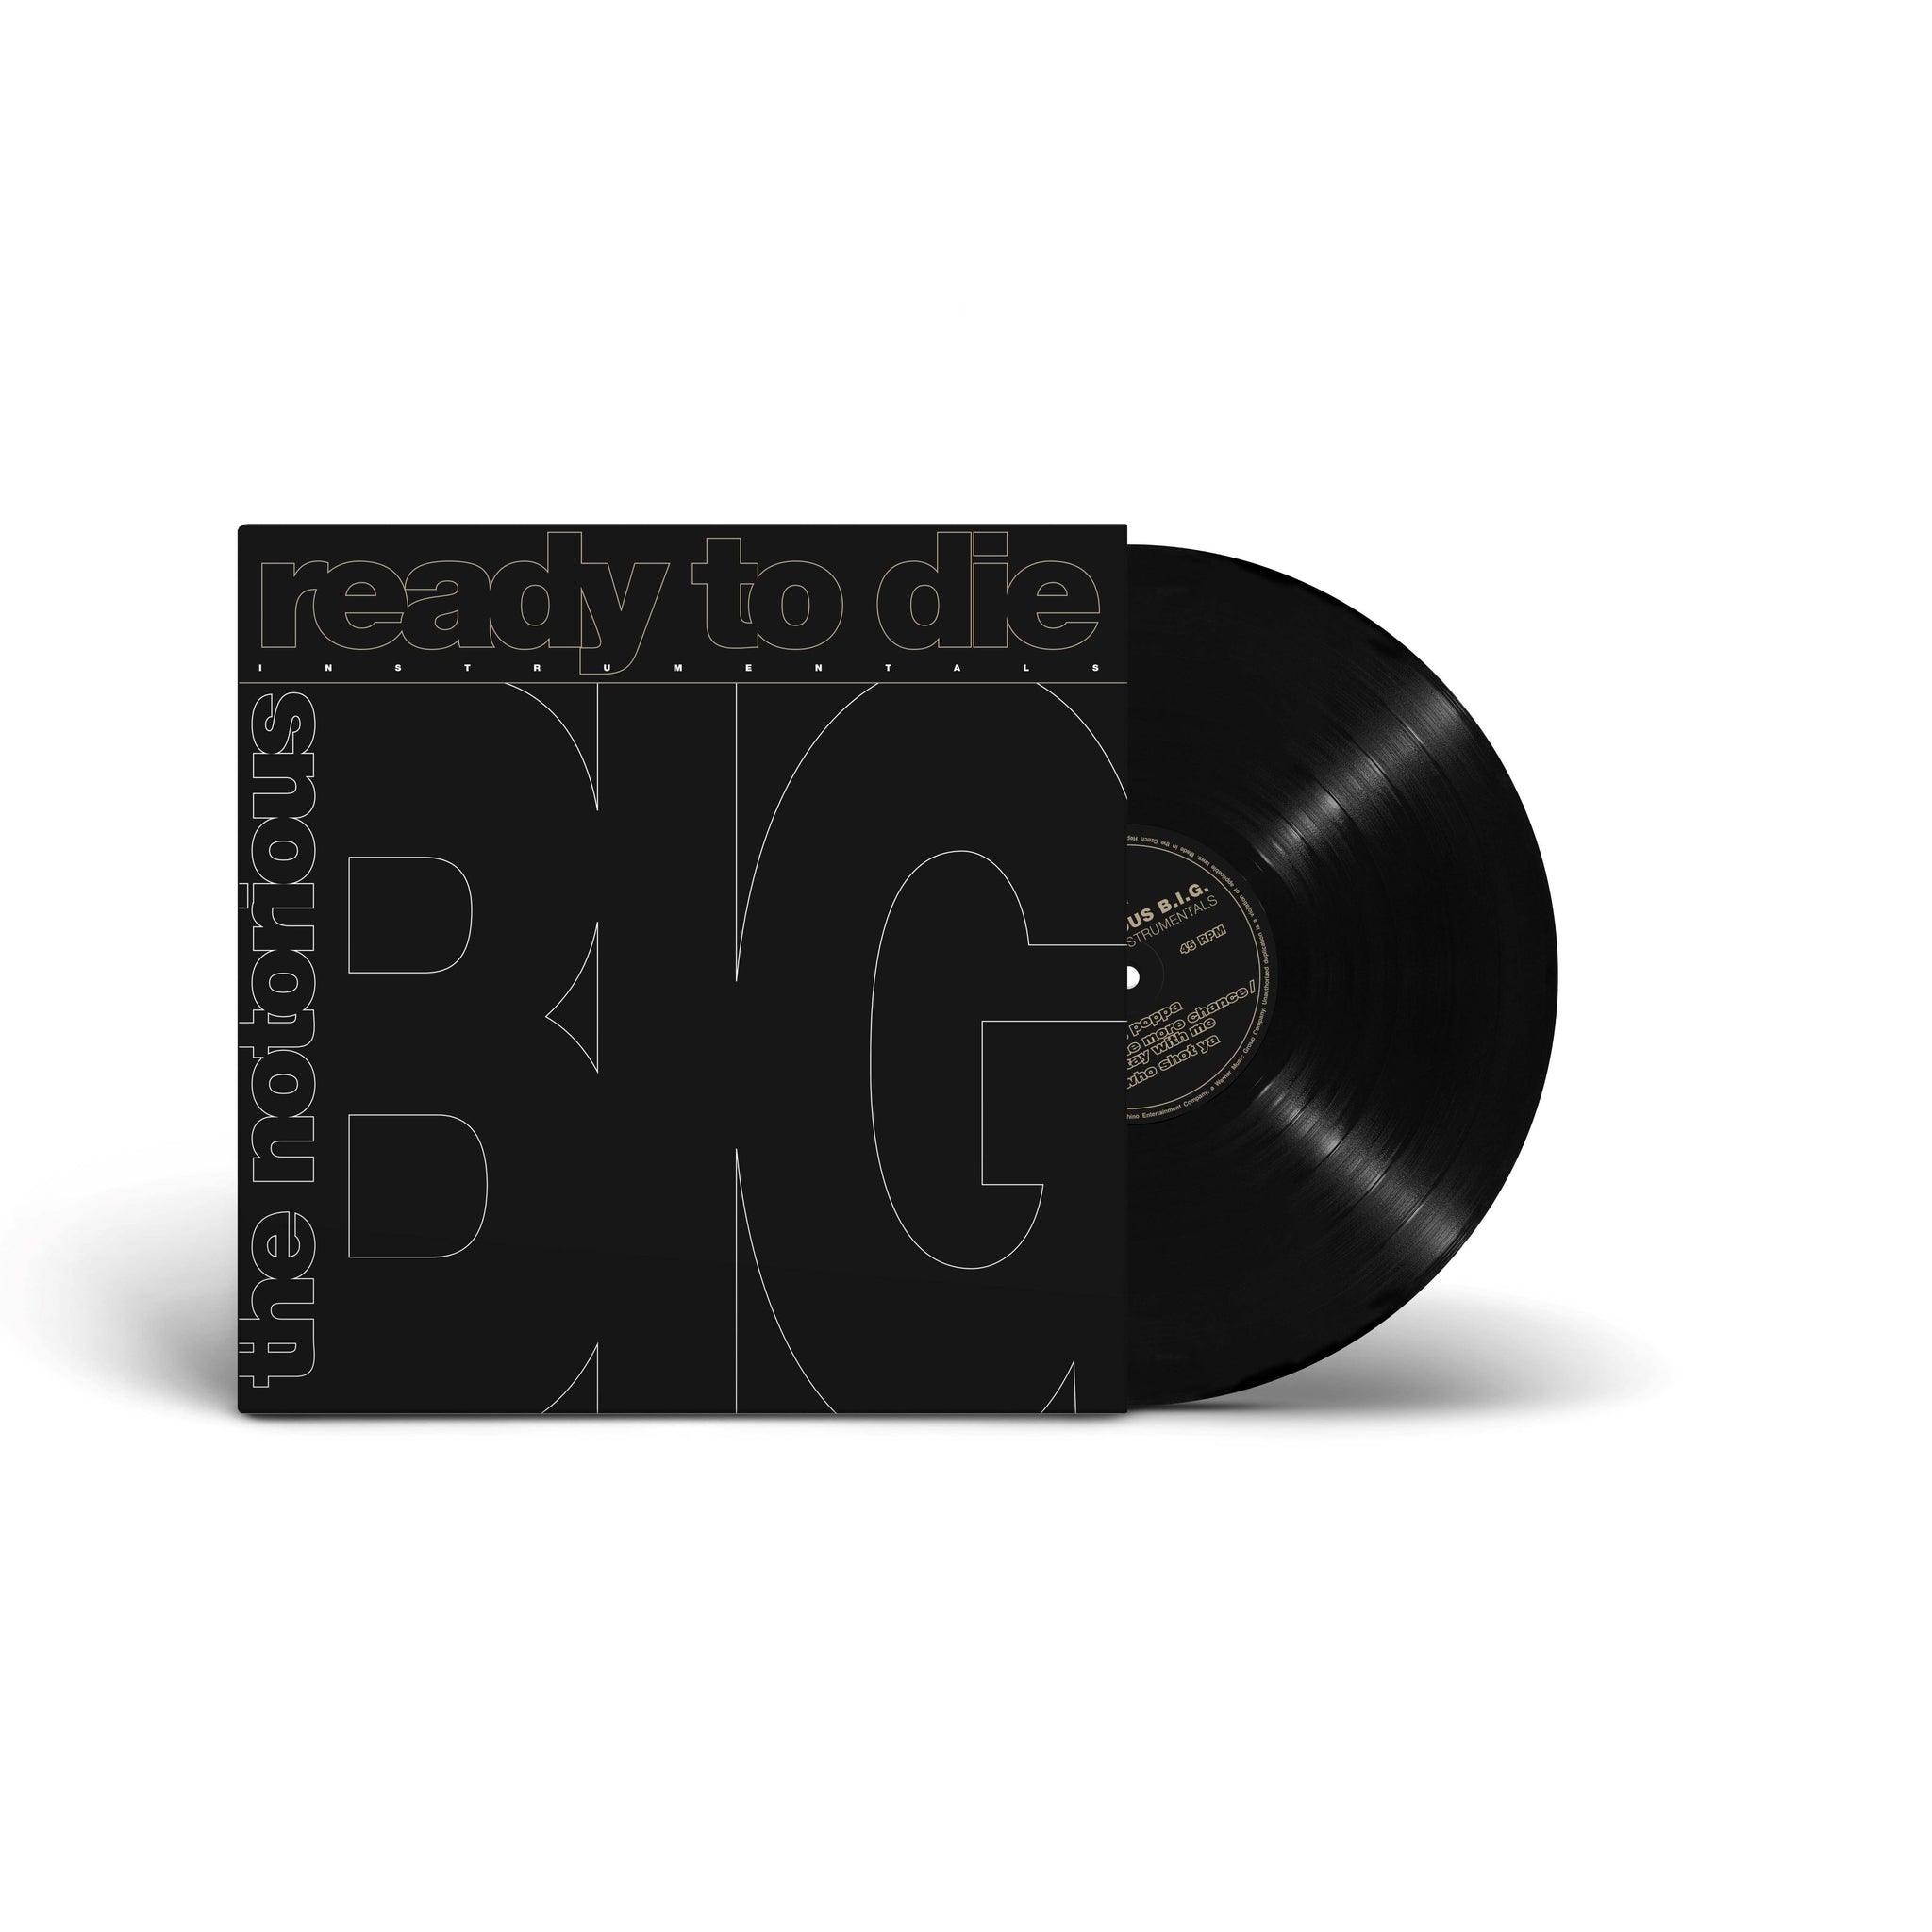 THE NOTORIOUS B.I.G. - Ready To Die: The Instrumentals - 1 LP - Black Vinyl  [RSD 2024]